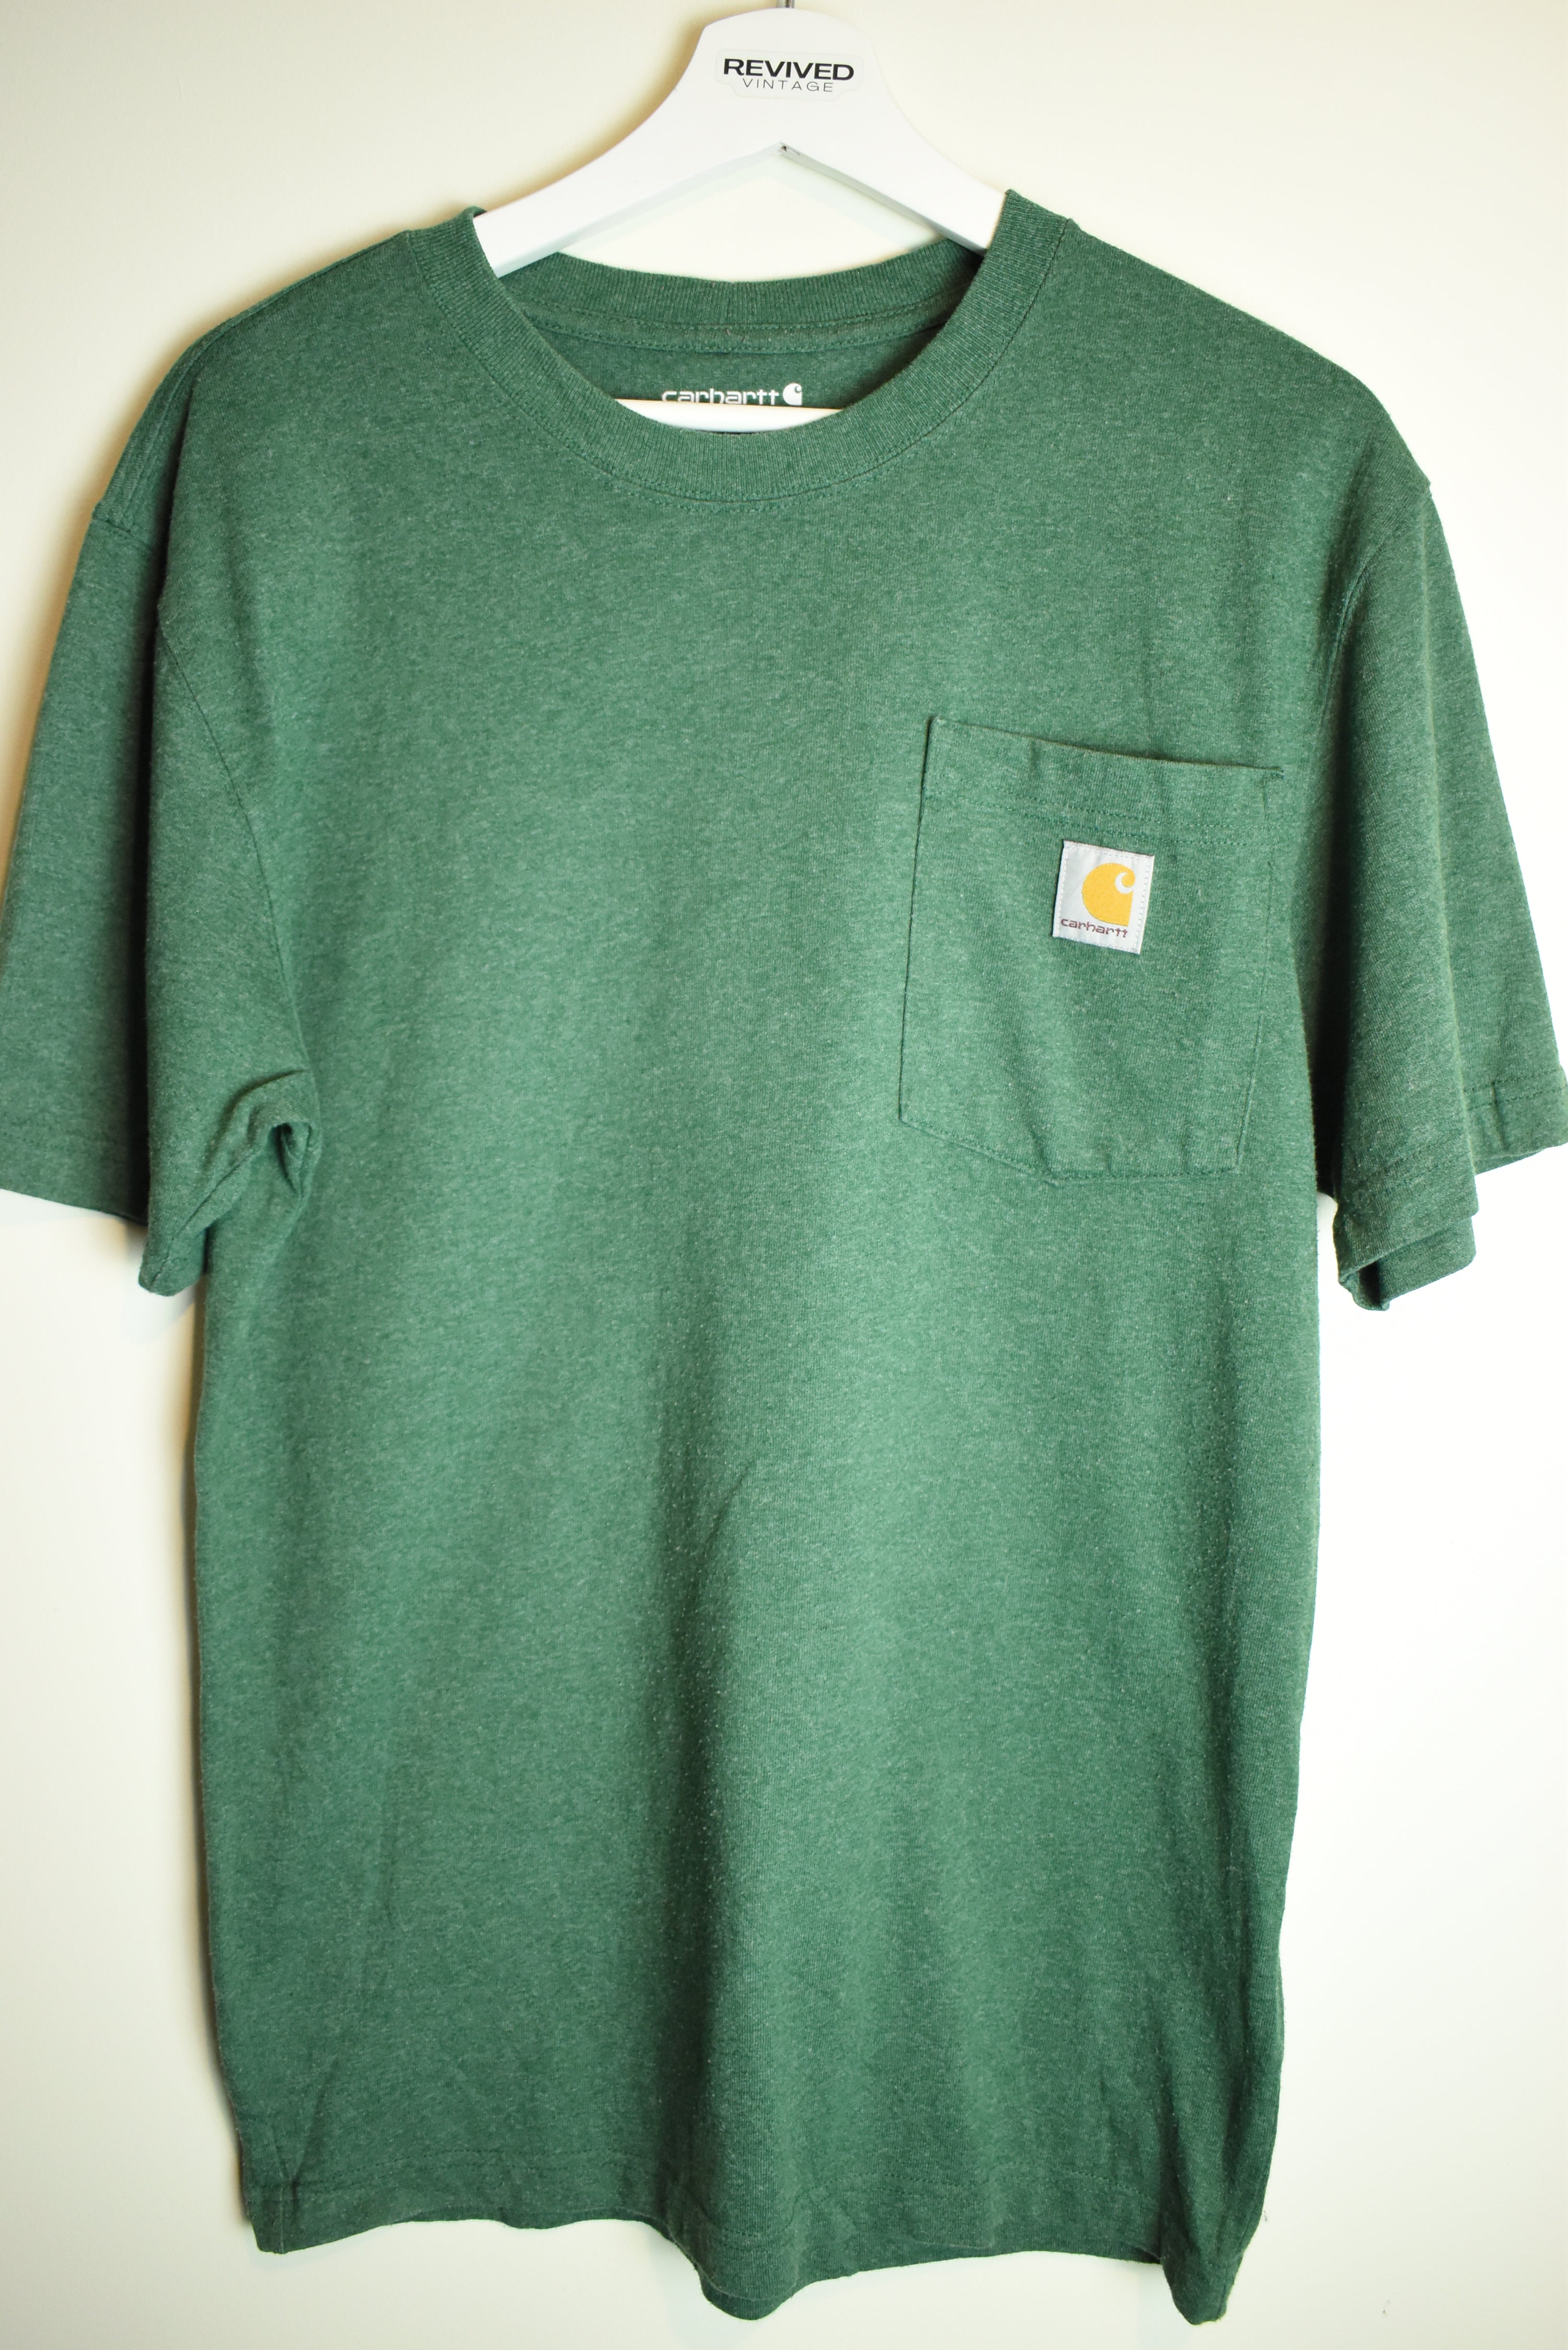 Vintage Carhartt Green Cotton T-Shirt Loose Fit Small